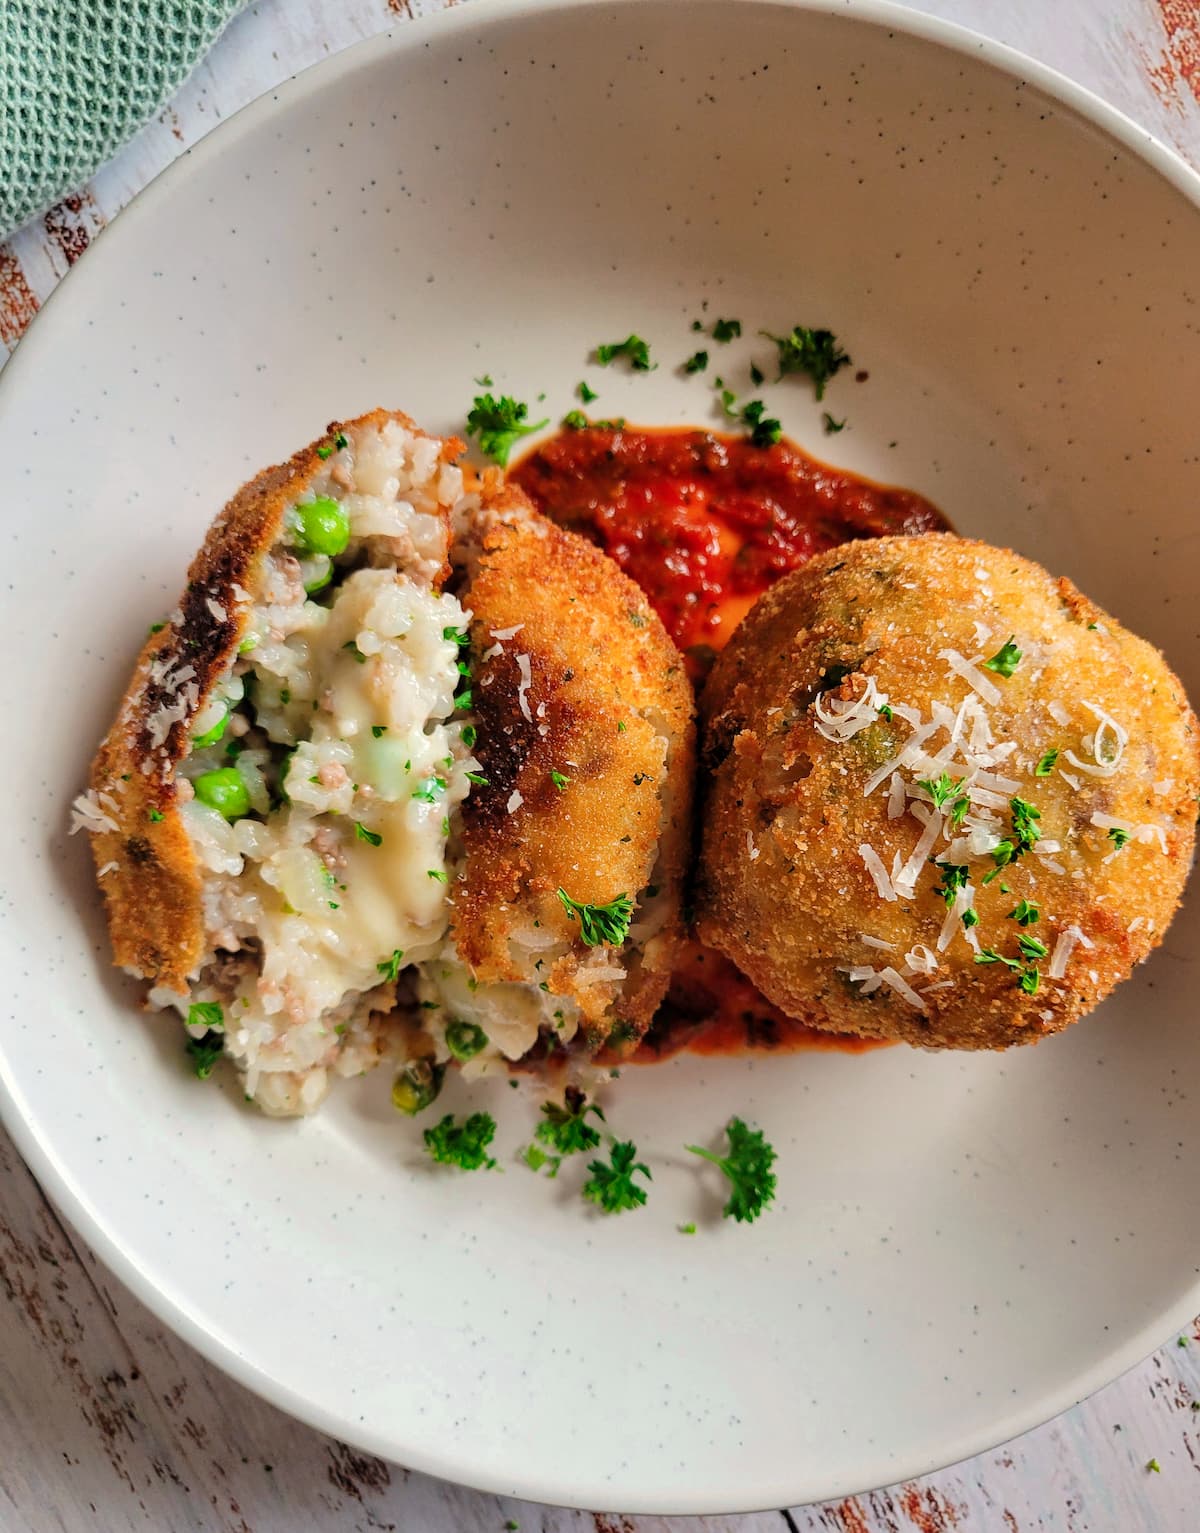 two arancini with tomato sauce on a plate garnished with fresh parsley and grated parmesan cheese, one of the rice balls is split open to show the rice, cheese and peas in the center